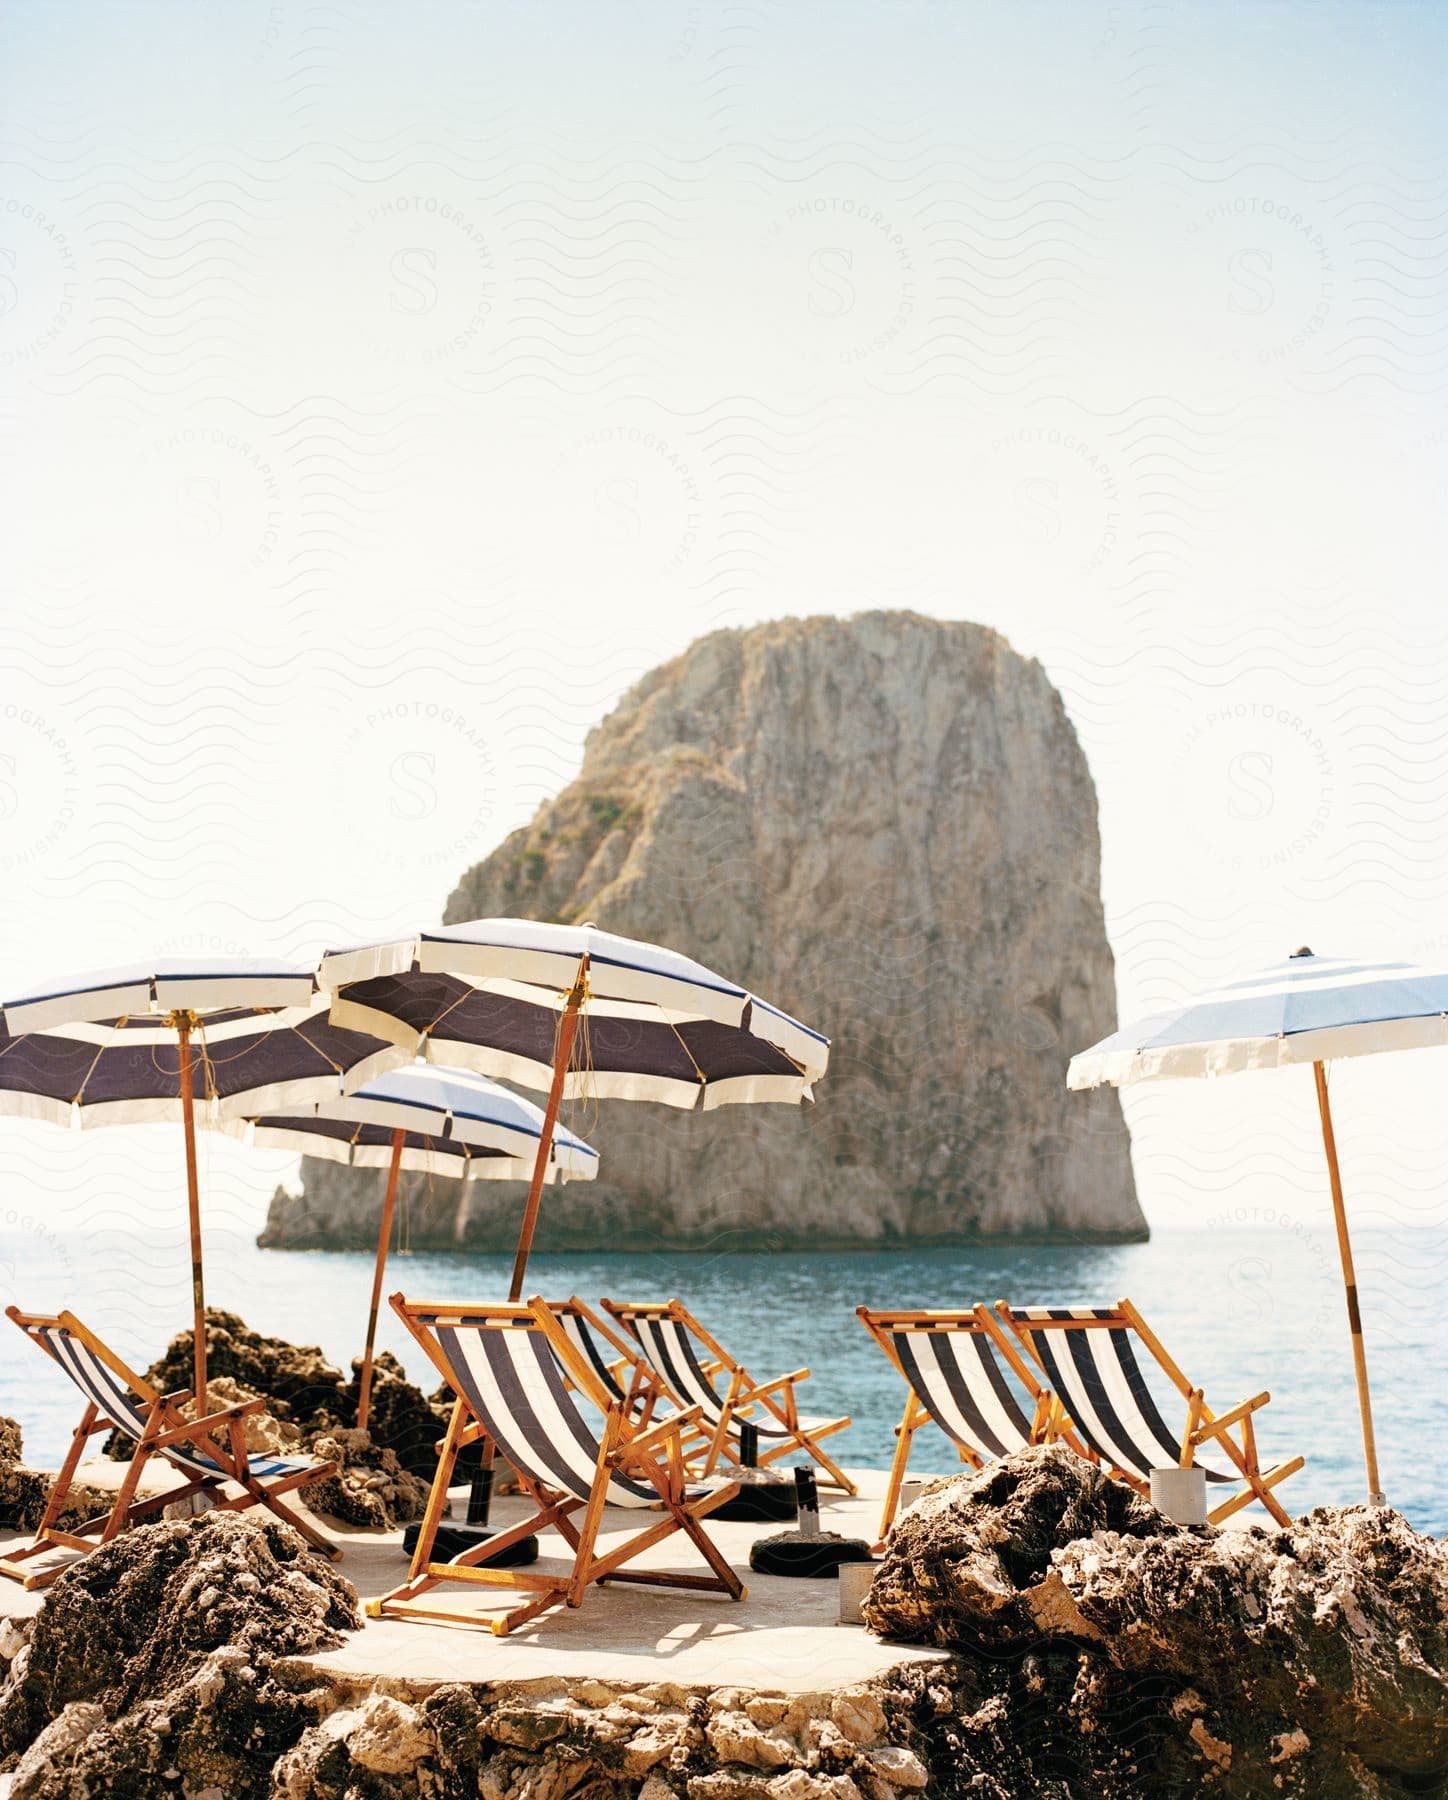 A sunny beach with chairs umbrellas and a rocky hill in the background